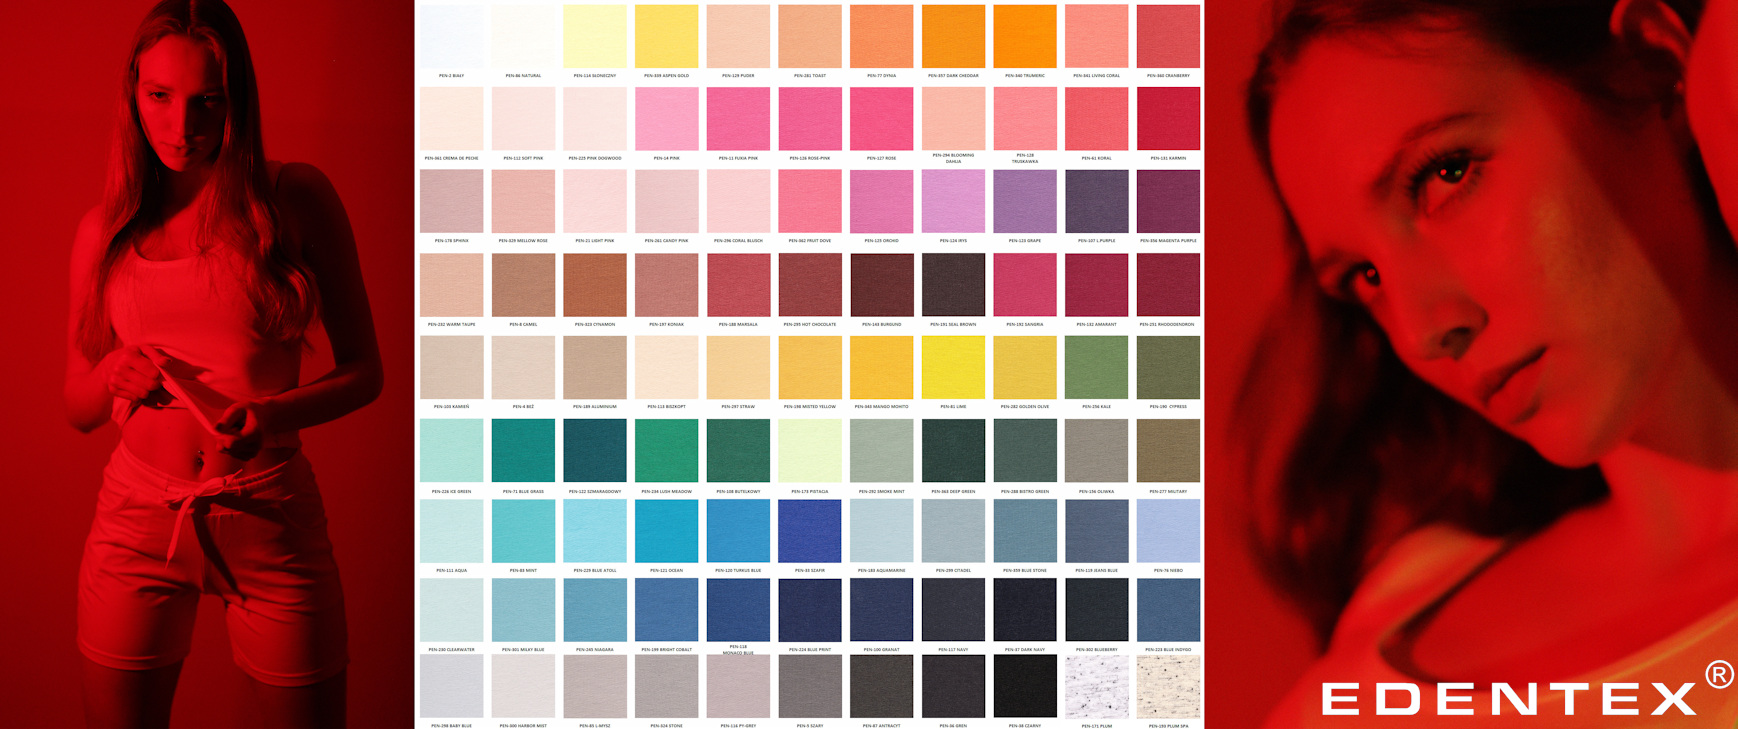 At the EDENTEX® warehouse in Łódź there are over 1000 colours of different fabrics